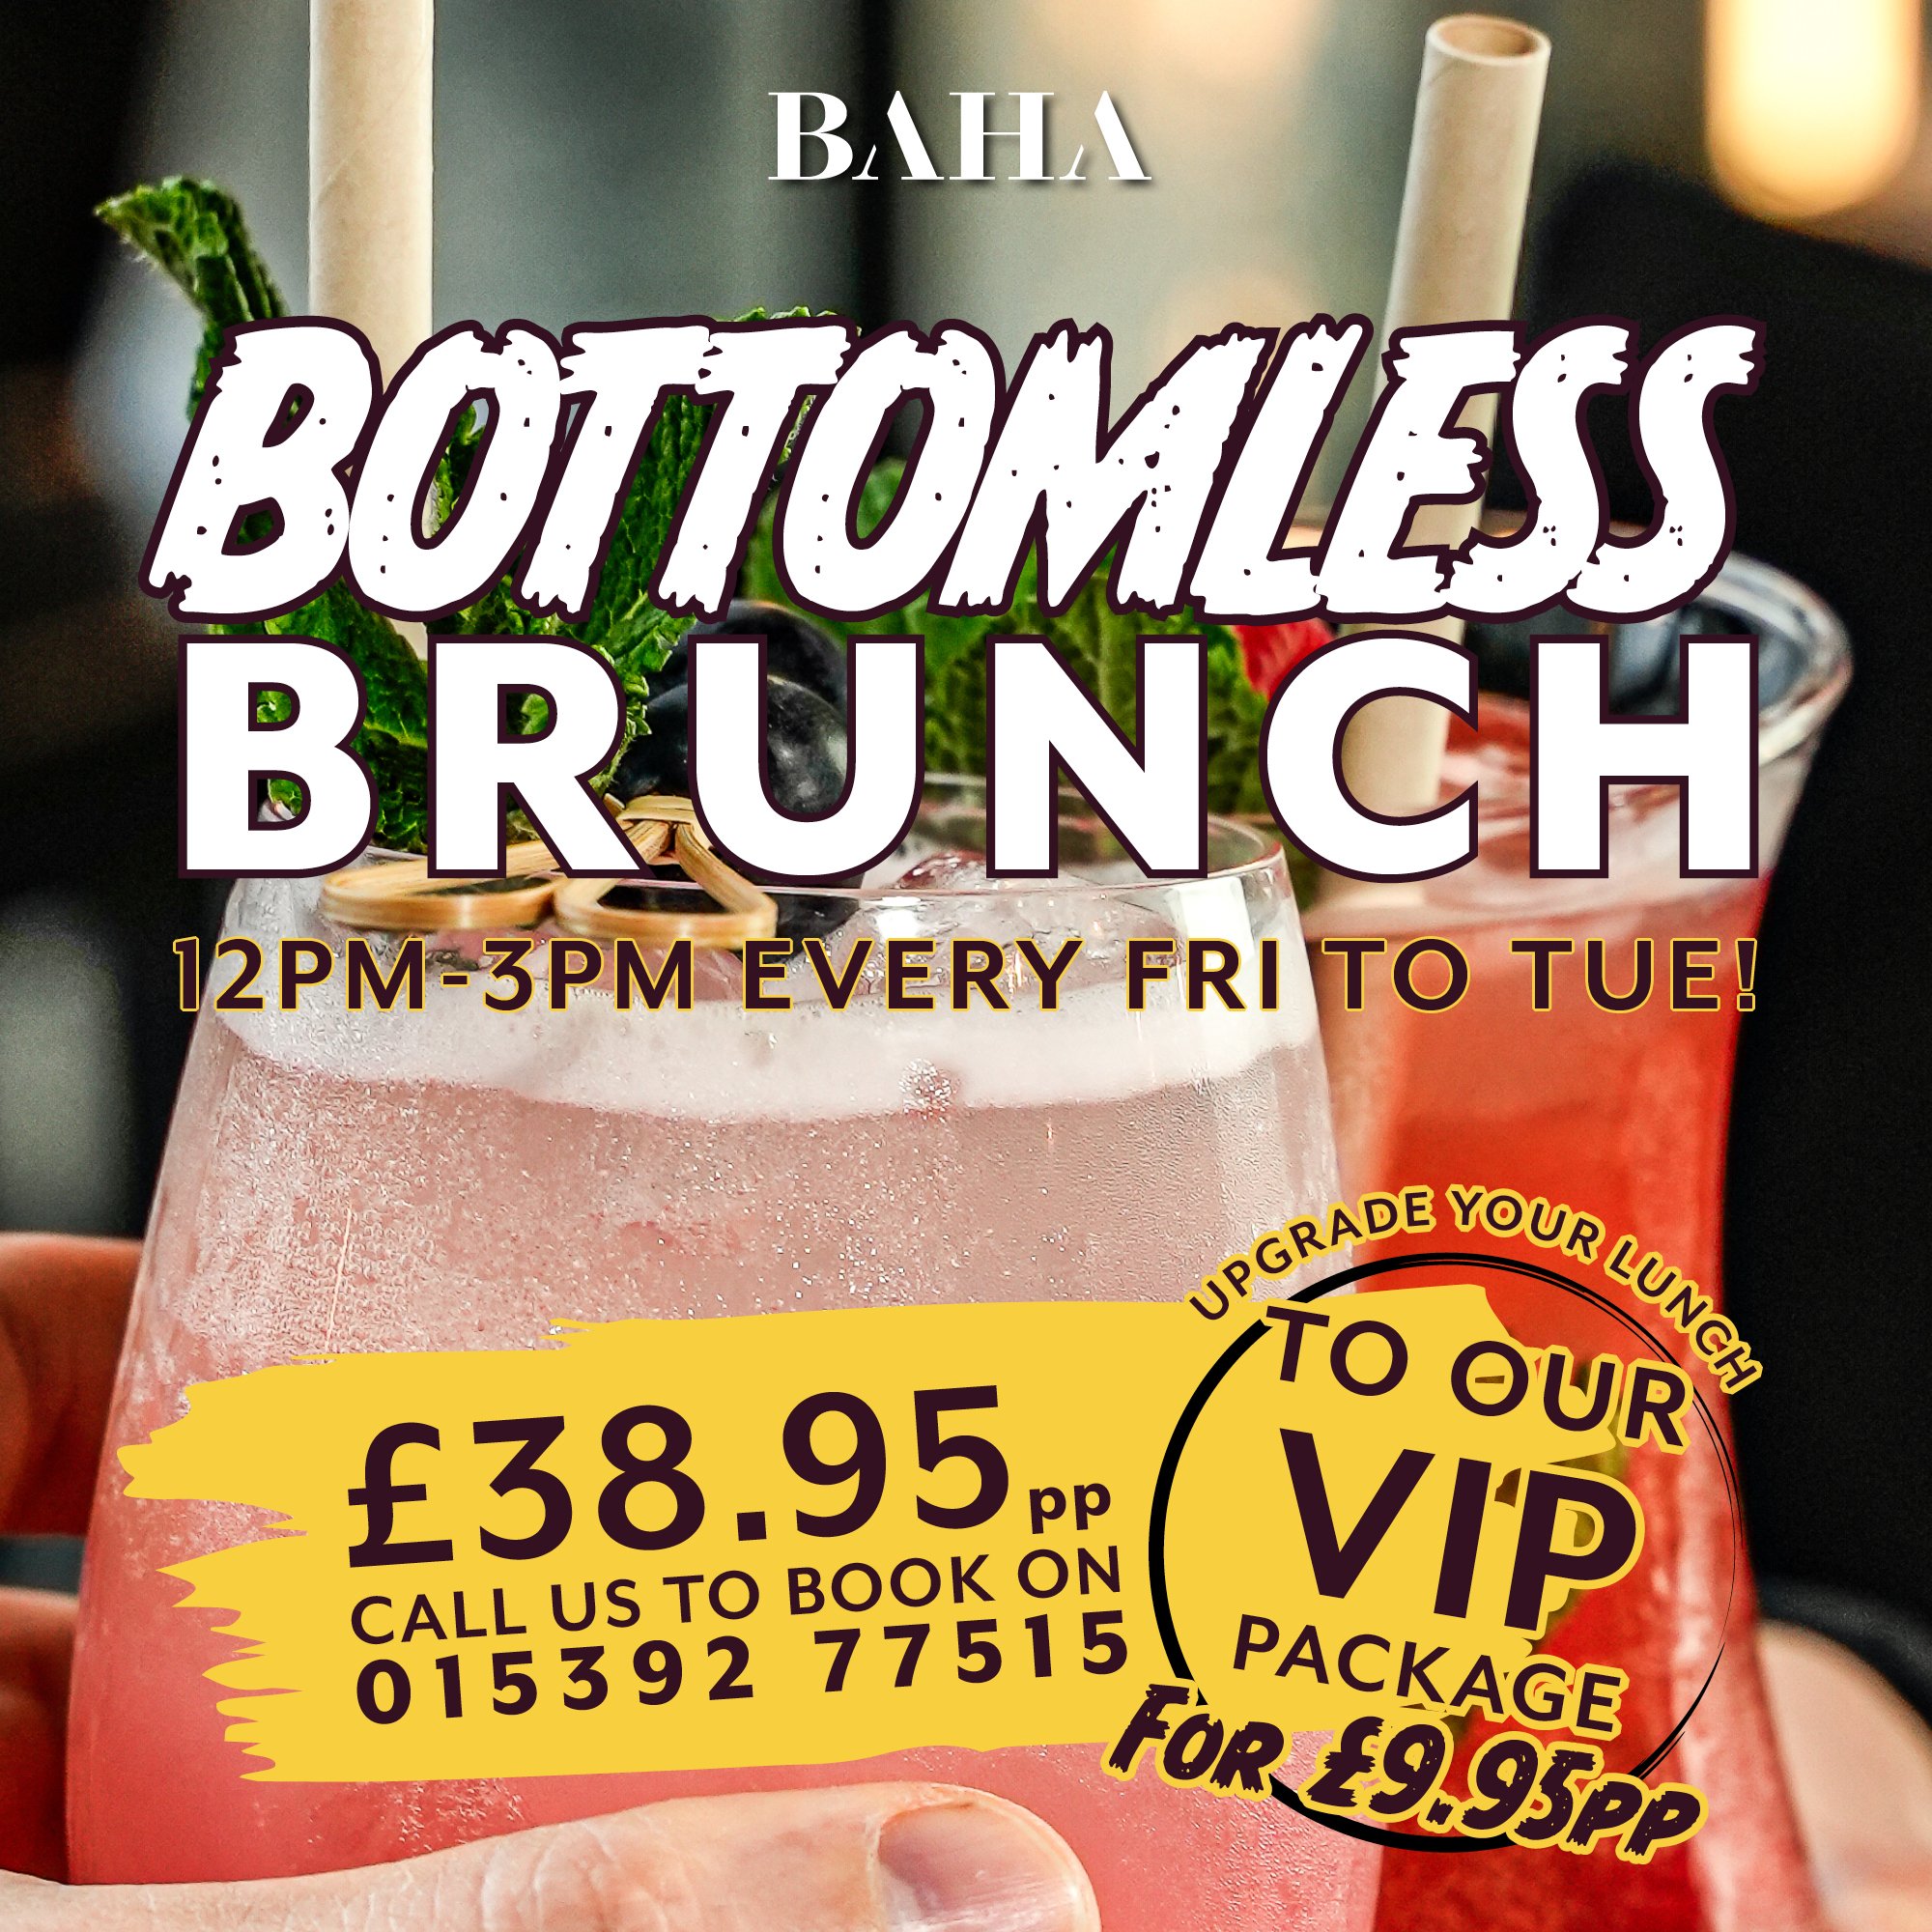 🍹✨ IMPORTANT Bottomless Brunch UPDATE! ✨🍳
Bottomless Brunch NOW Available Friday to Tuesday! 🌄

Sip on delightful cocktails and treat yourself to delicious food, all within 90 minutes of brunch bliss. 🍹🍽️ 

Tag us in your photos to share the bru